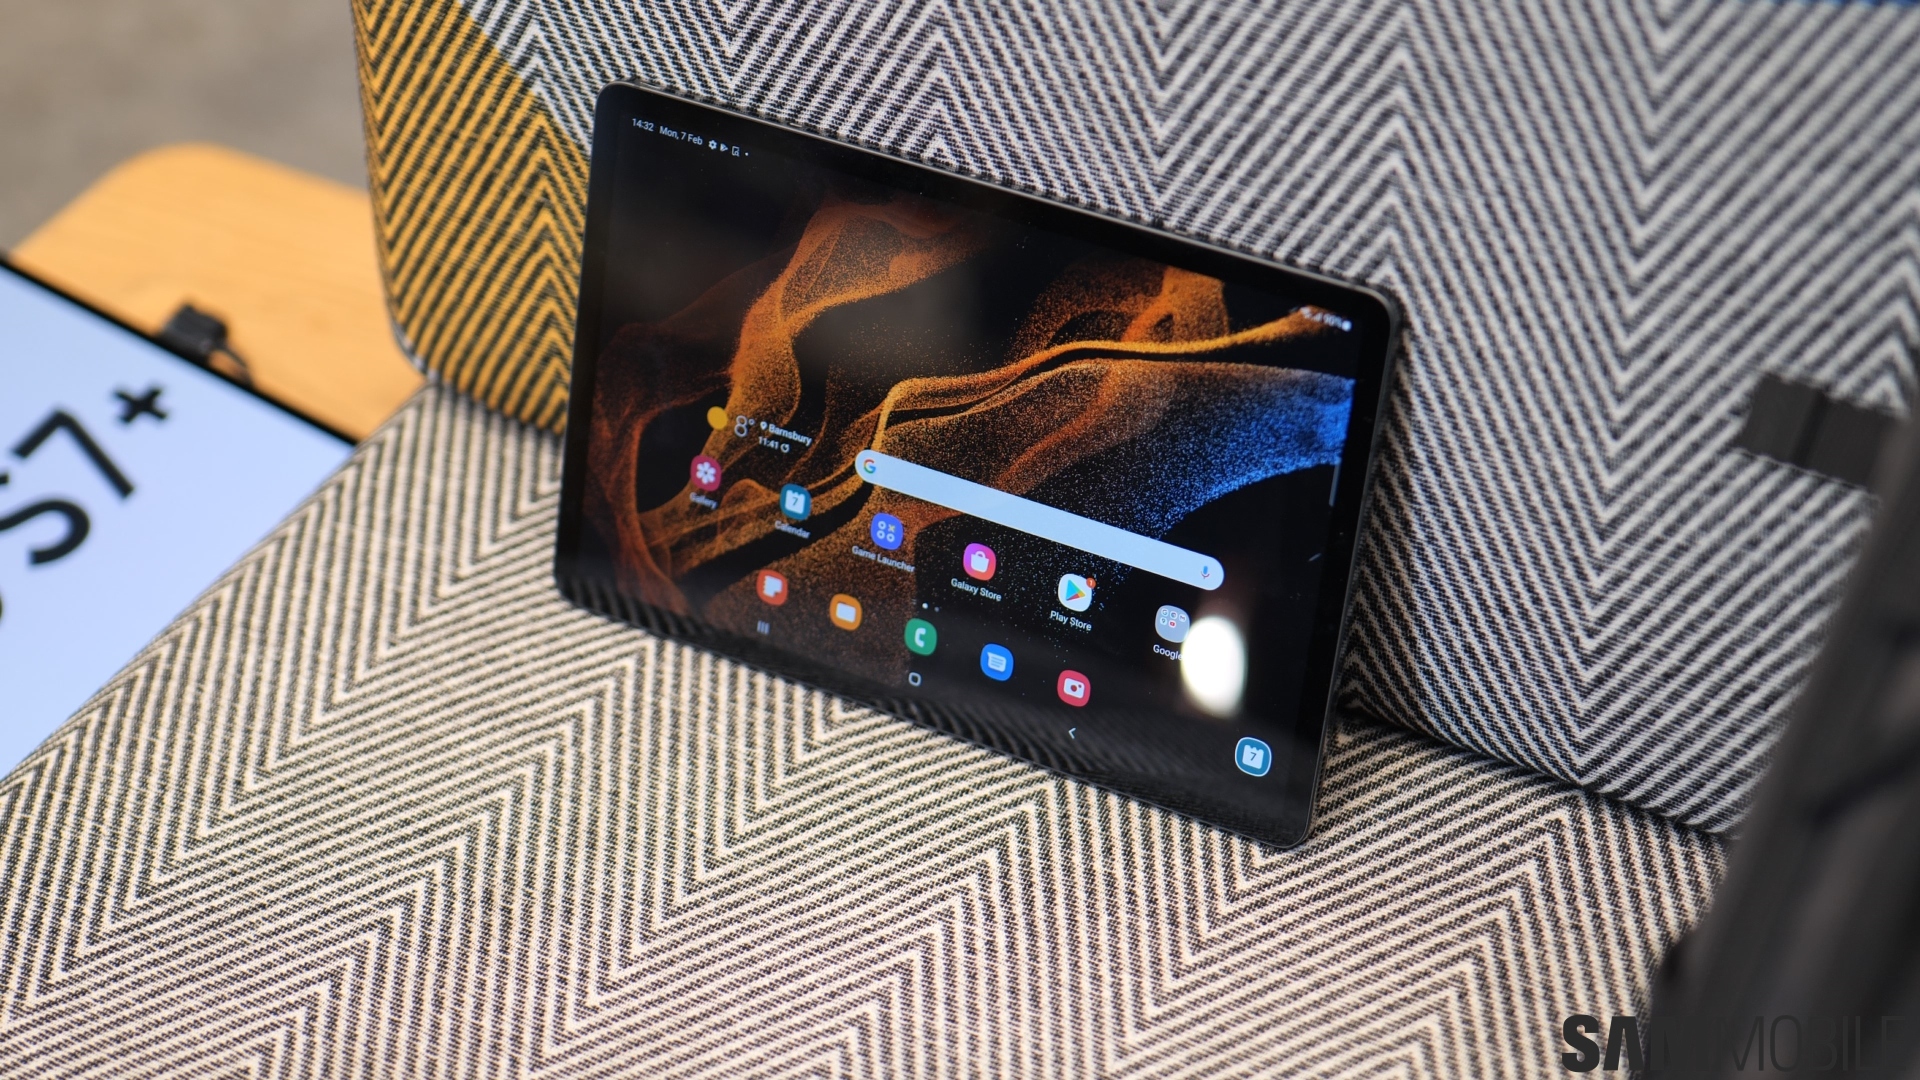 Samsung Galaxy Tab S8 Ultra hands-on: release date, price, & more